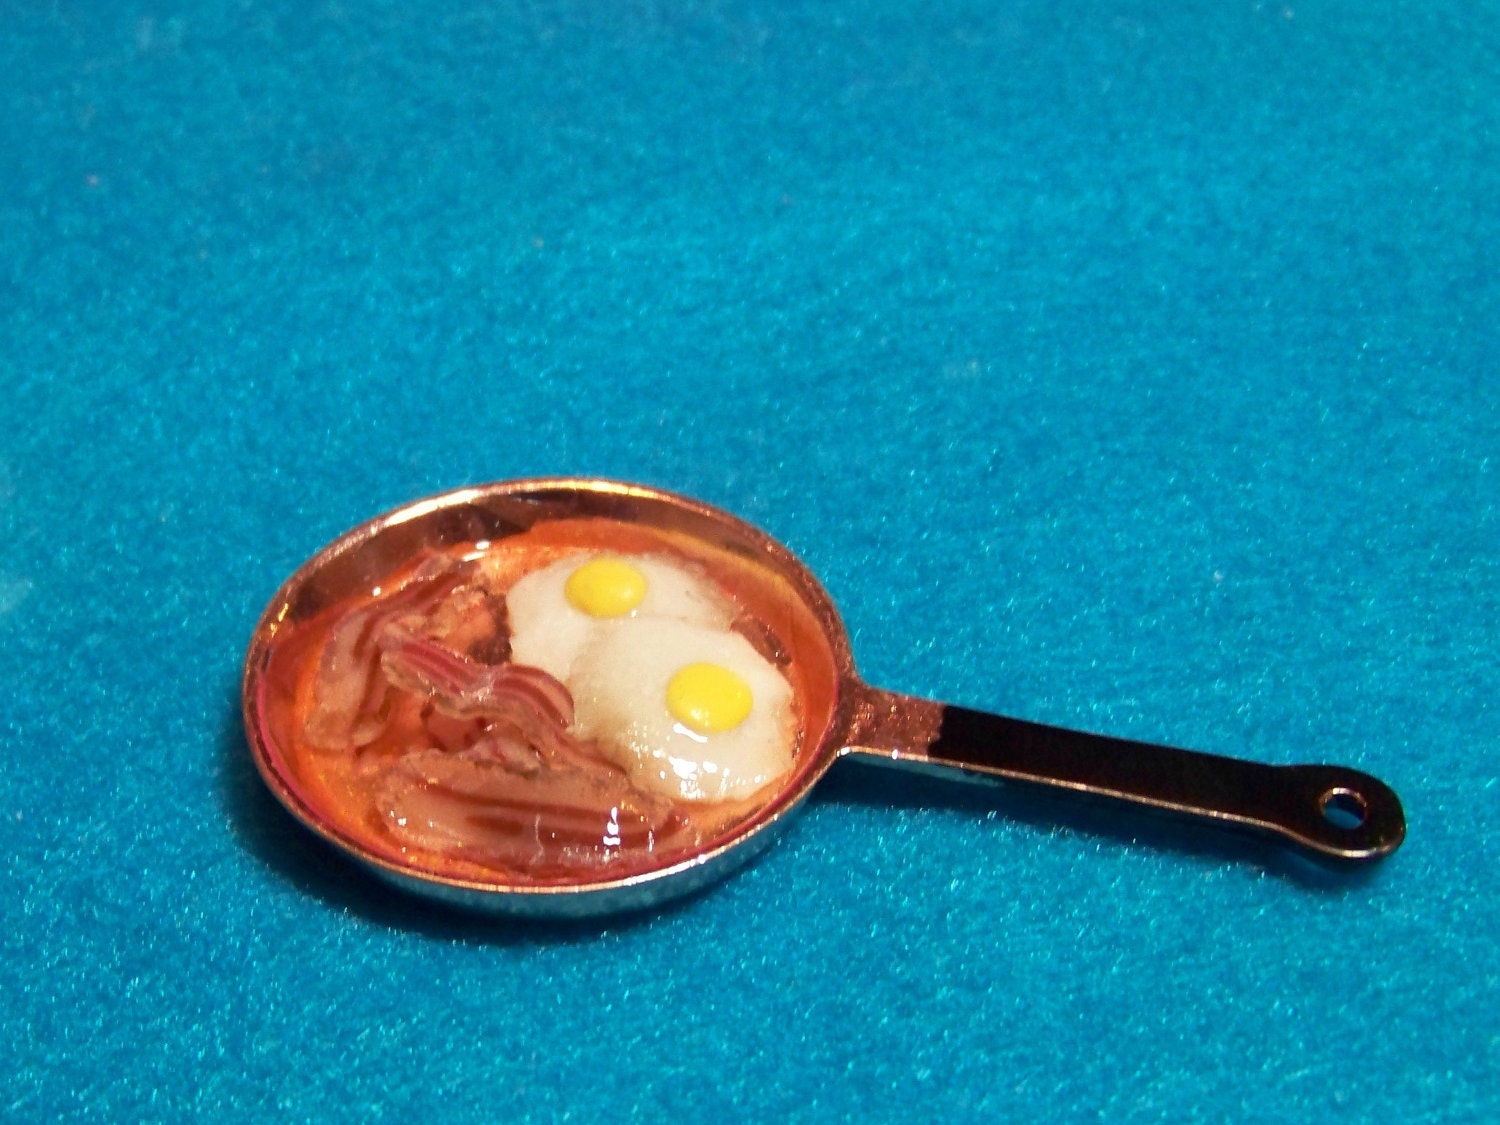 One Twelth Scale Dollhouse Miniature Fried Eggs Sunny Side Up and Bacon Skillet 1:12